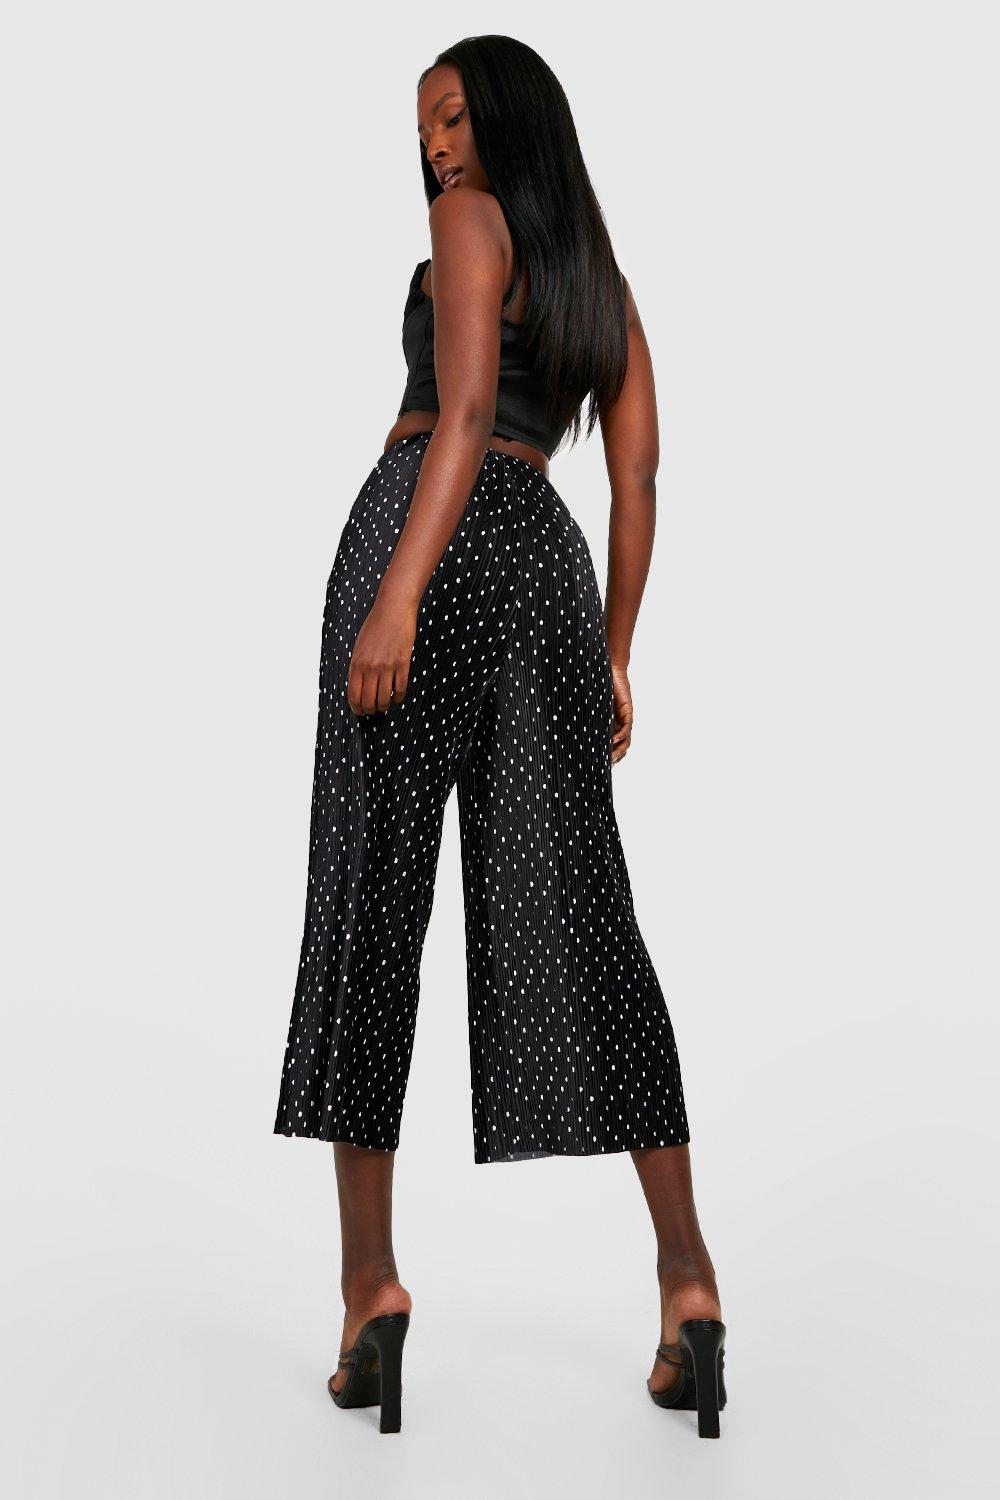 How to wear Culottes No Matter Your Body Type